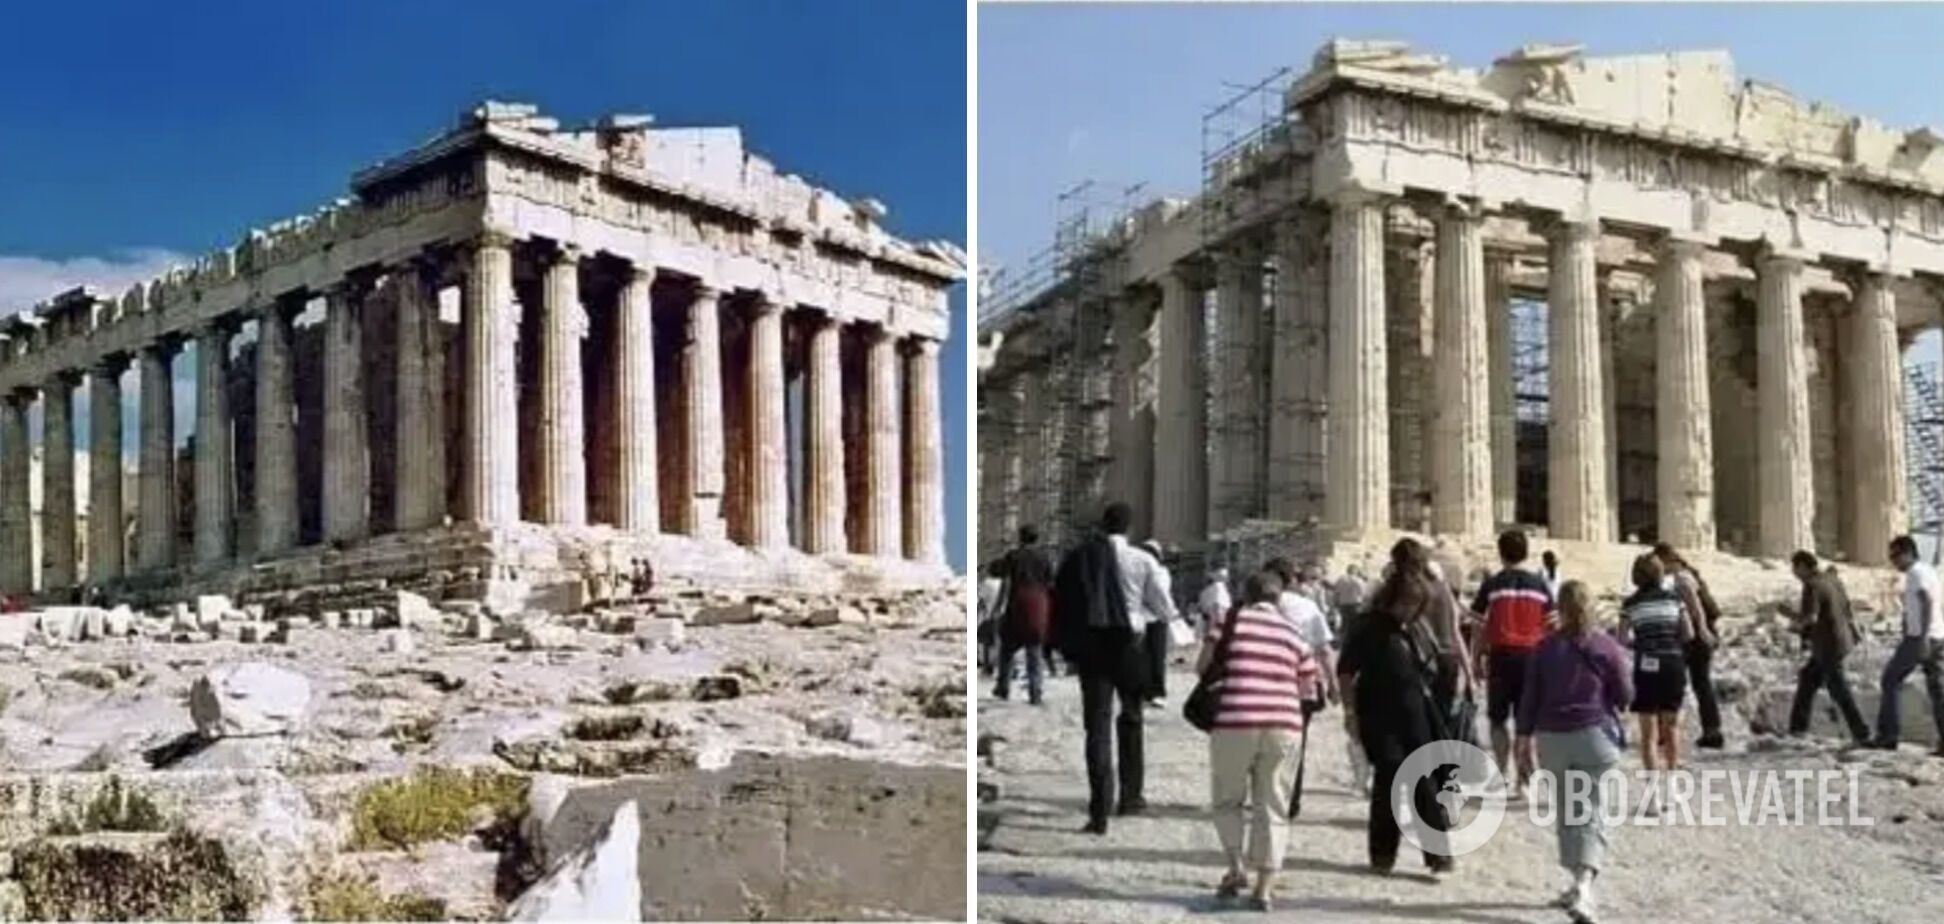 The Acropolis of Athens in Greece is under restoration